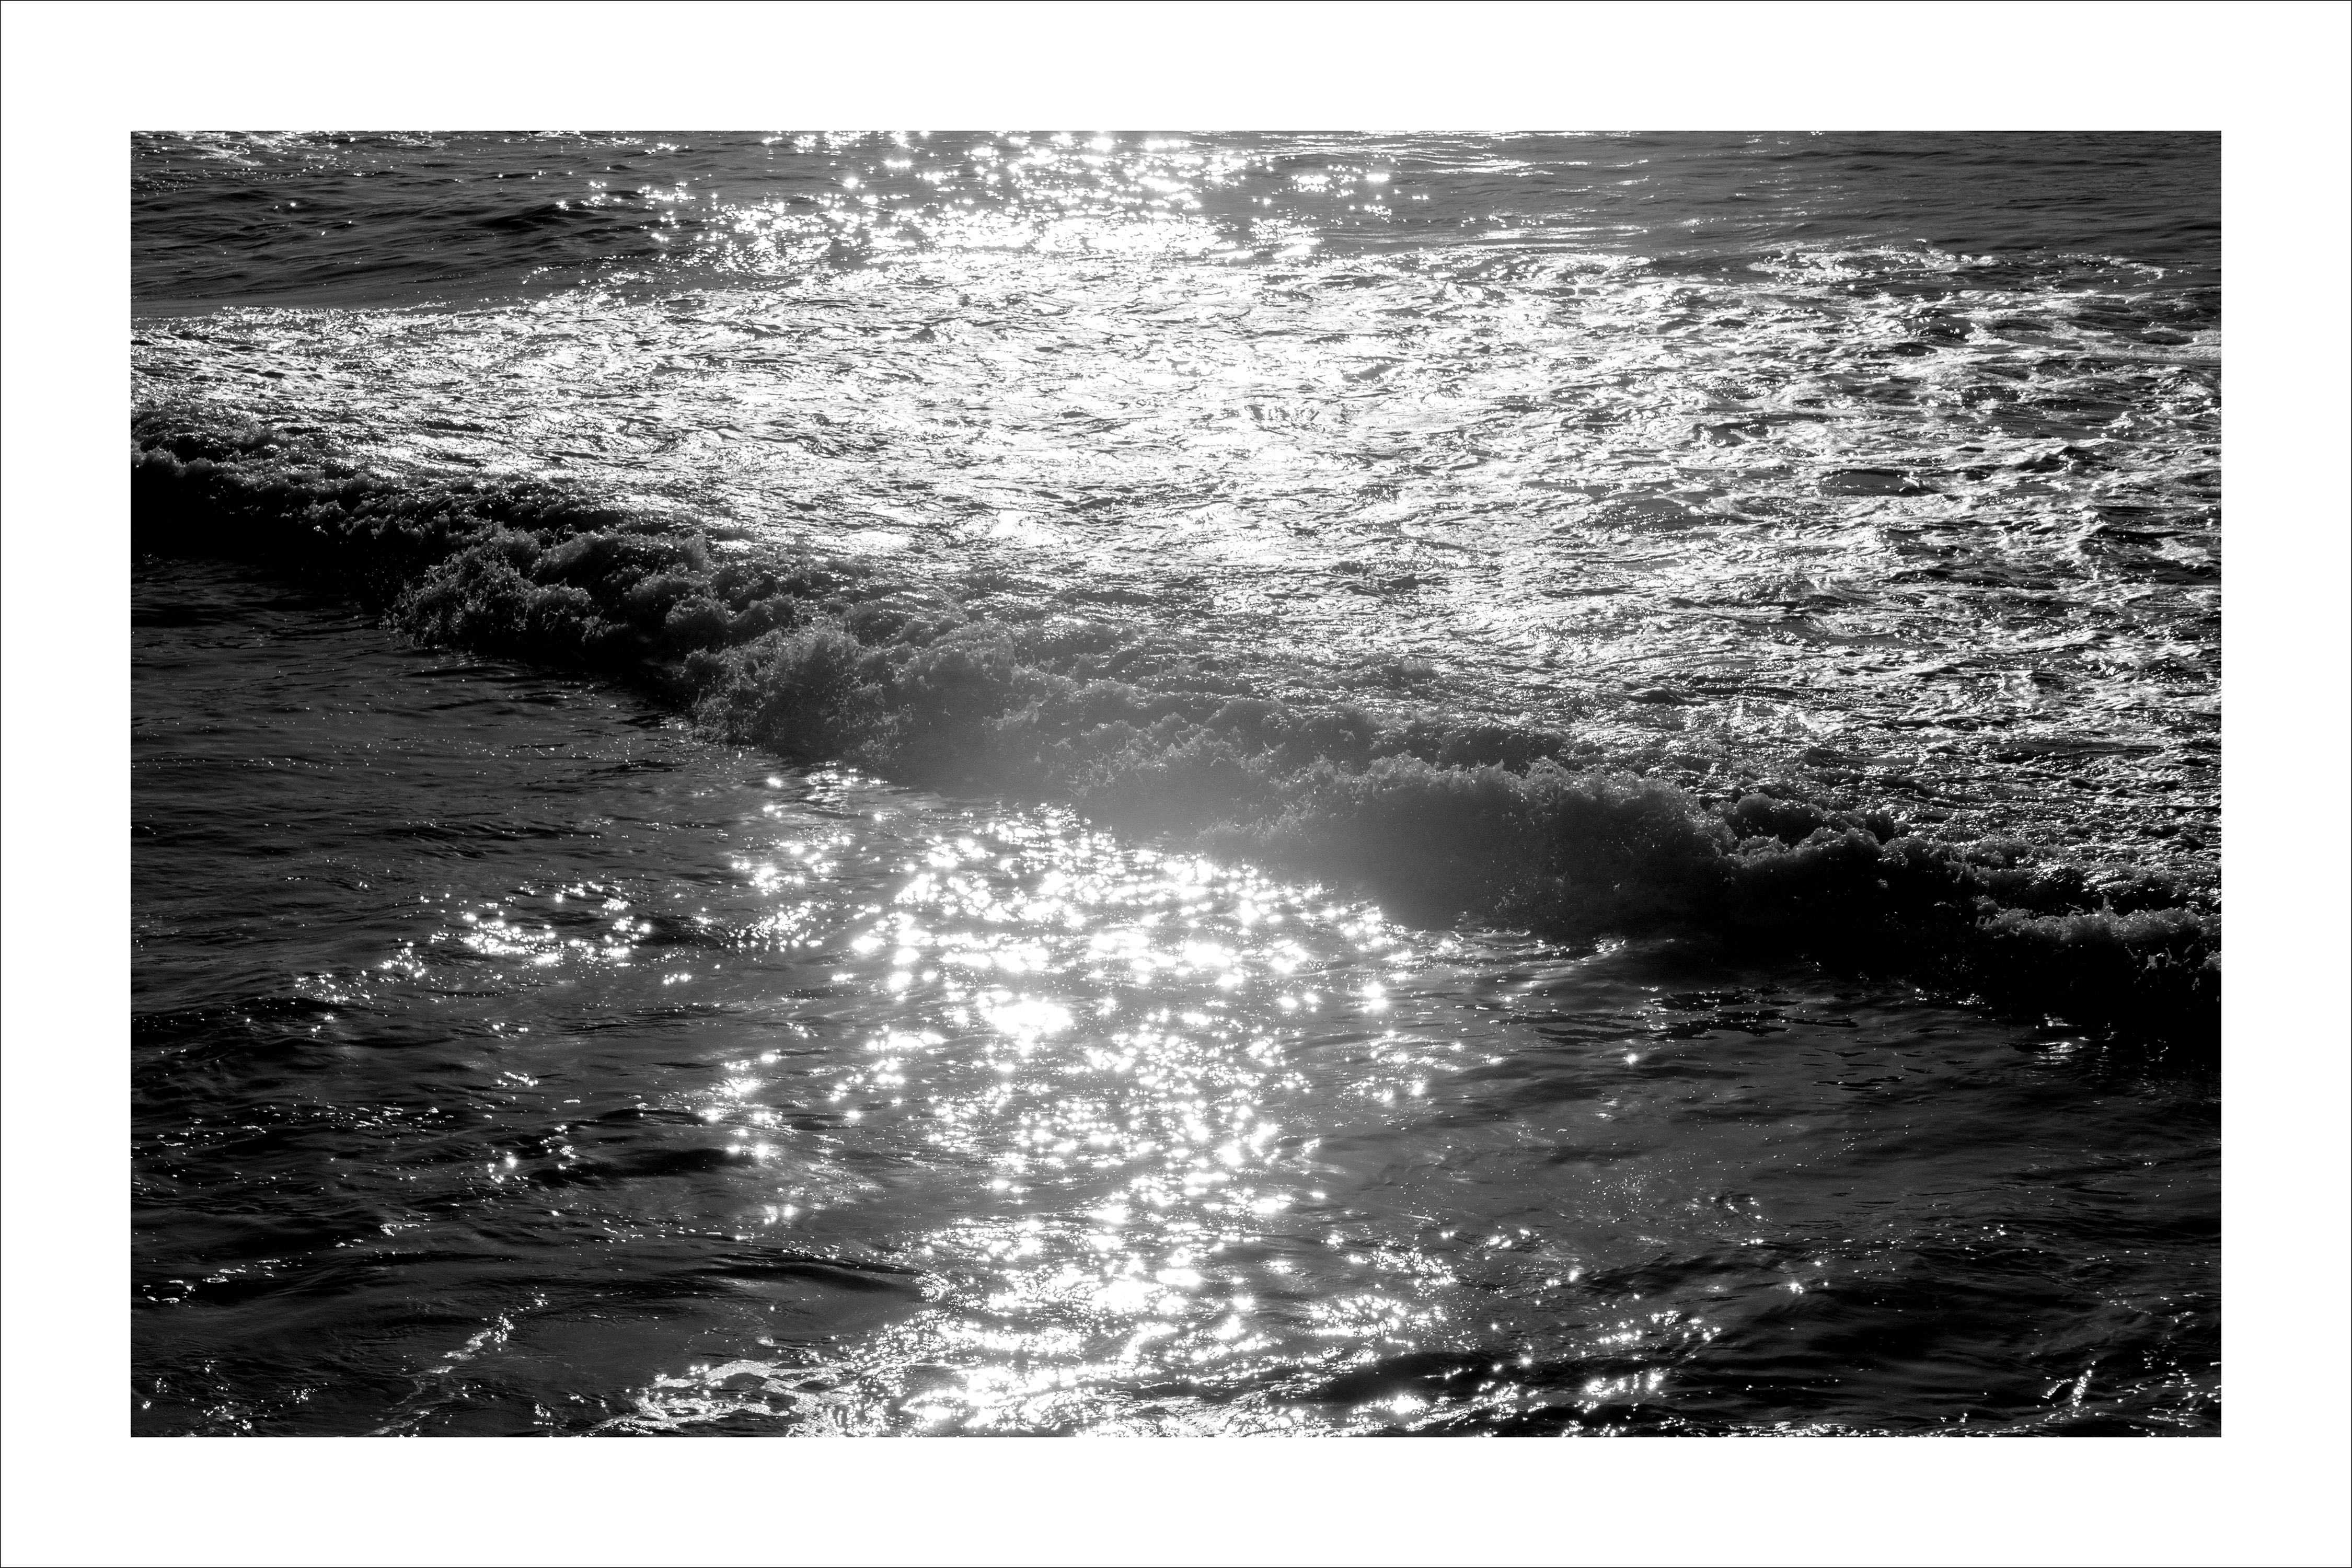 Seascape Black and White Giclée Print, Pacific Sunset Waves, Limited Edition